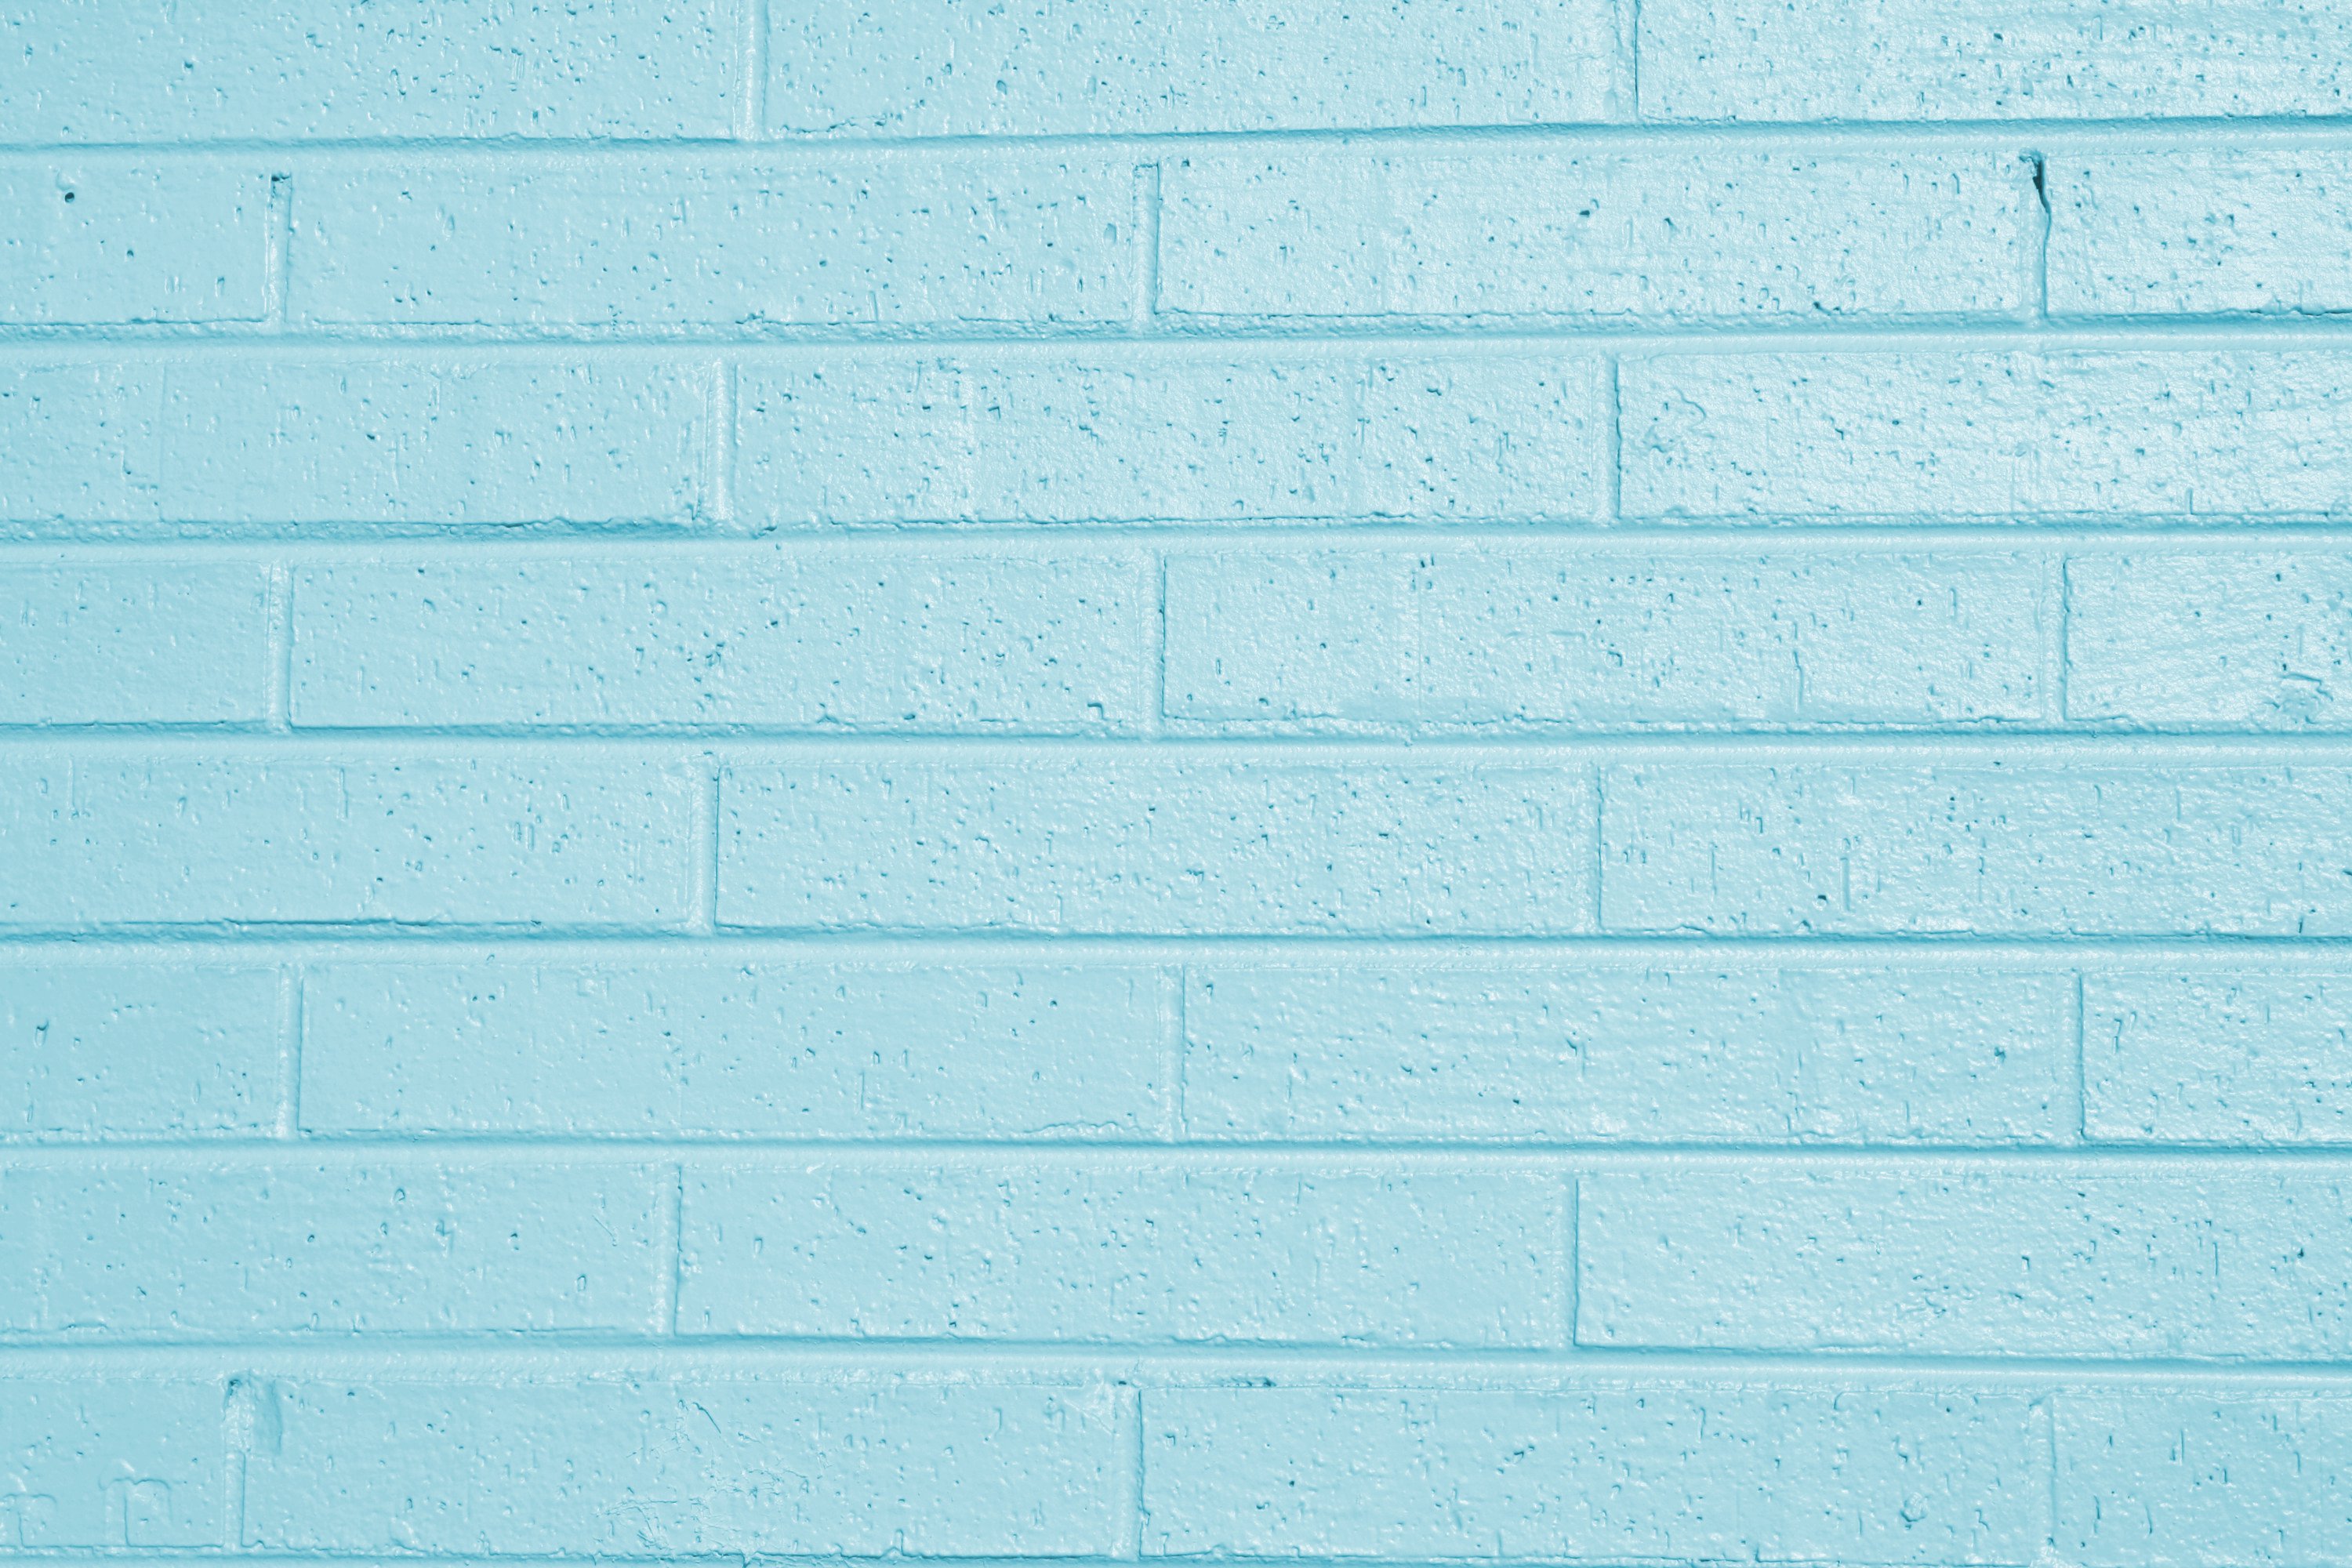 Teal Blue Painted Brick Wall Texture   Free High Resolution Photo